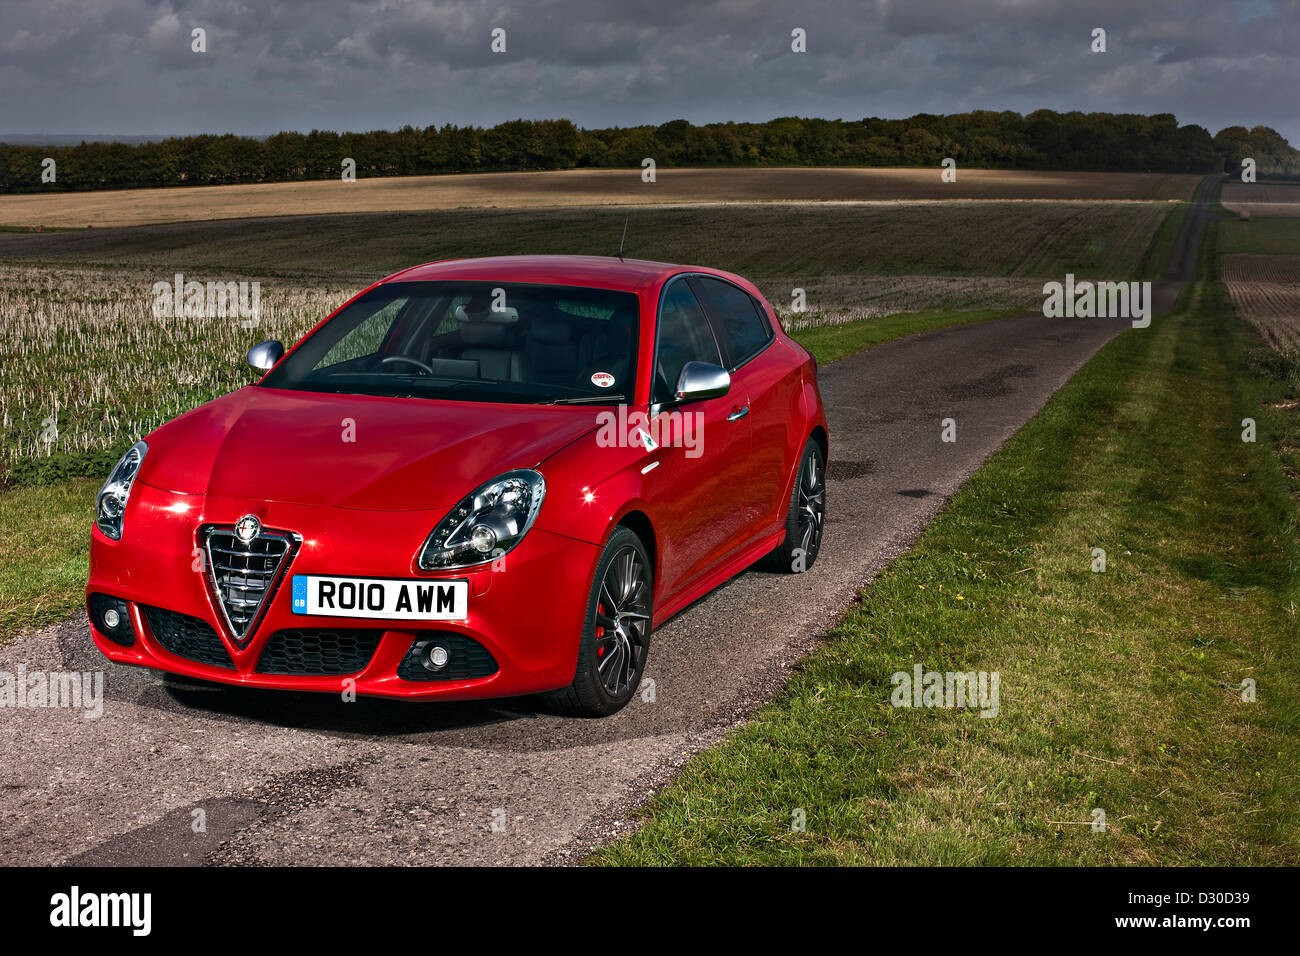 Rouge lumineux Alfa Romeo Giulietta, Winchester, England, UK Banque D'Images